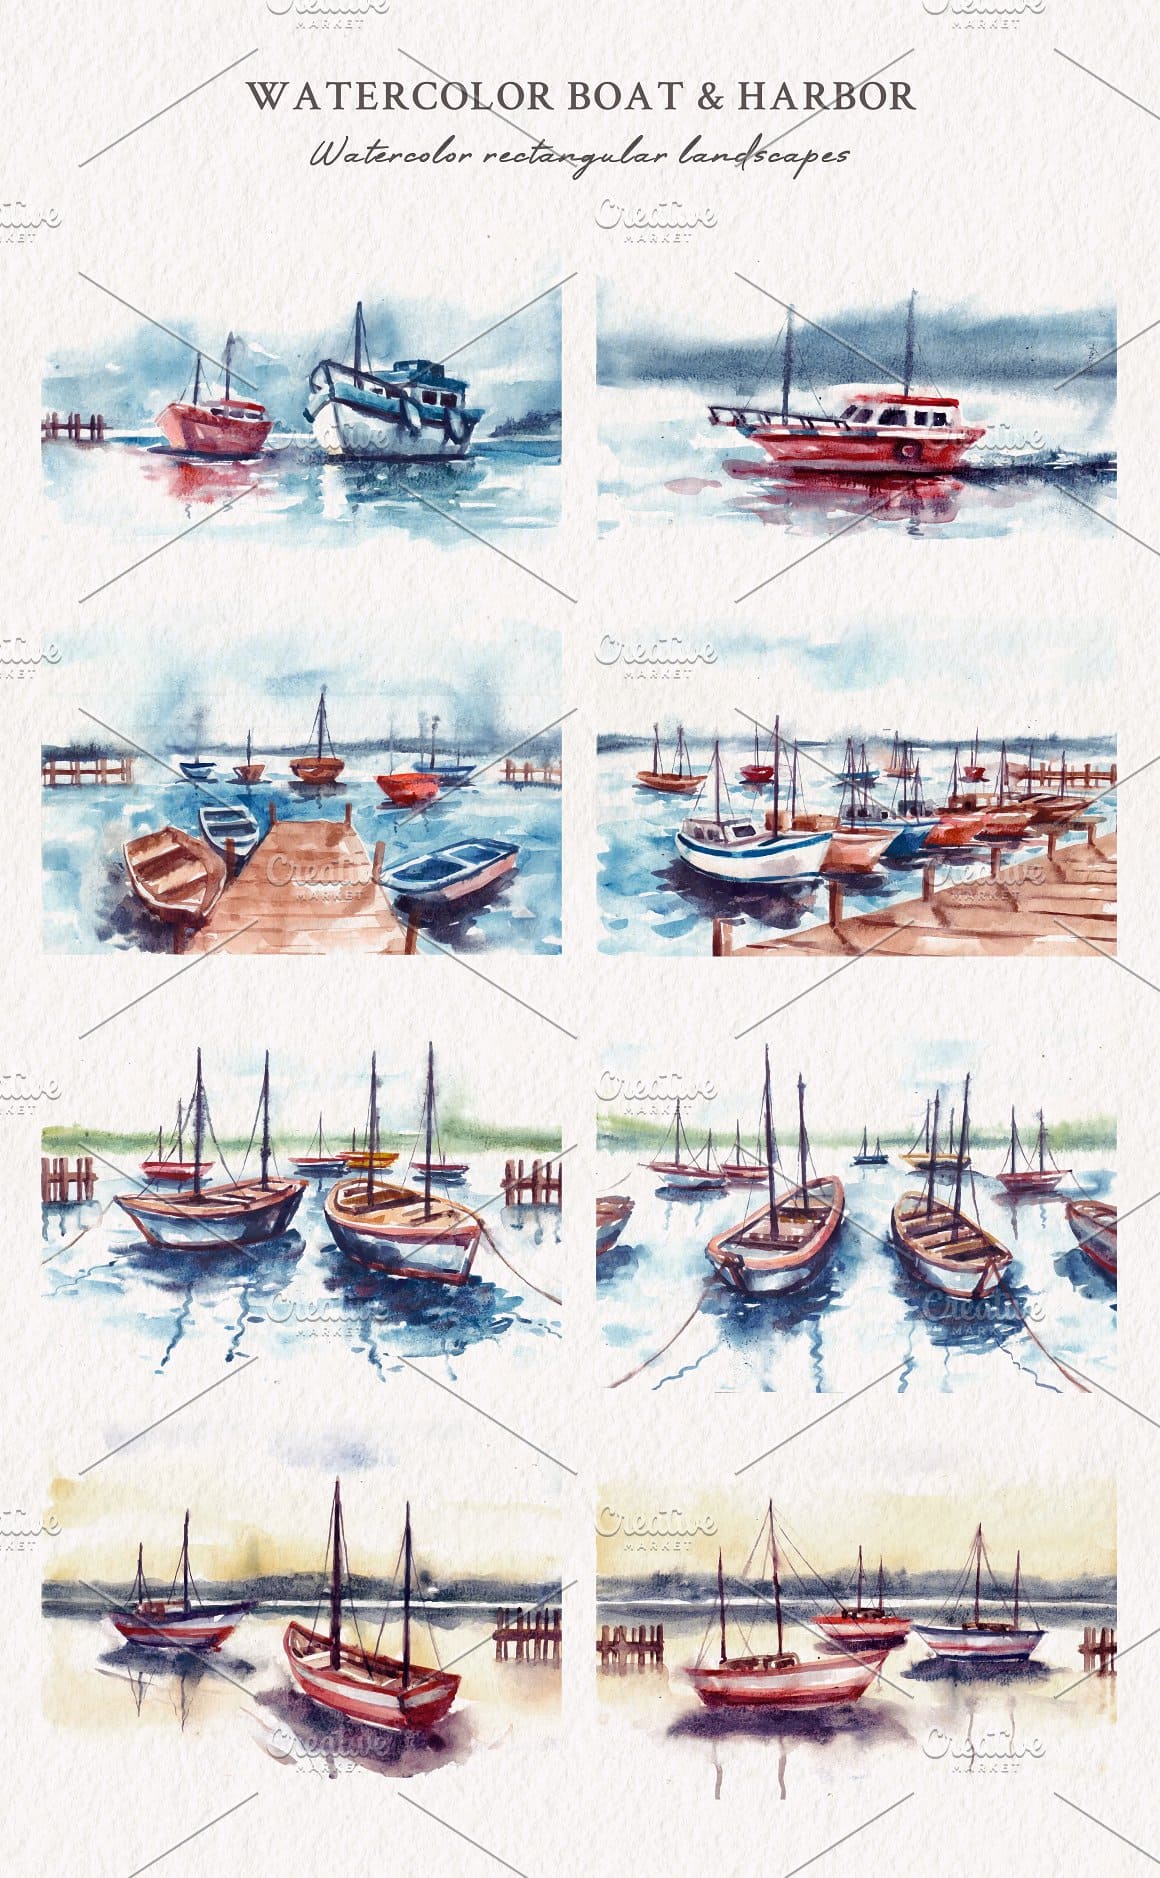 Examples of boats on the water drawn in watercolor.